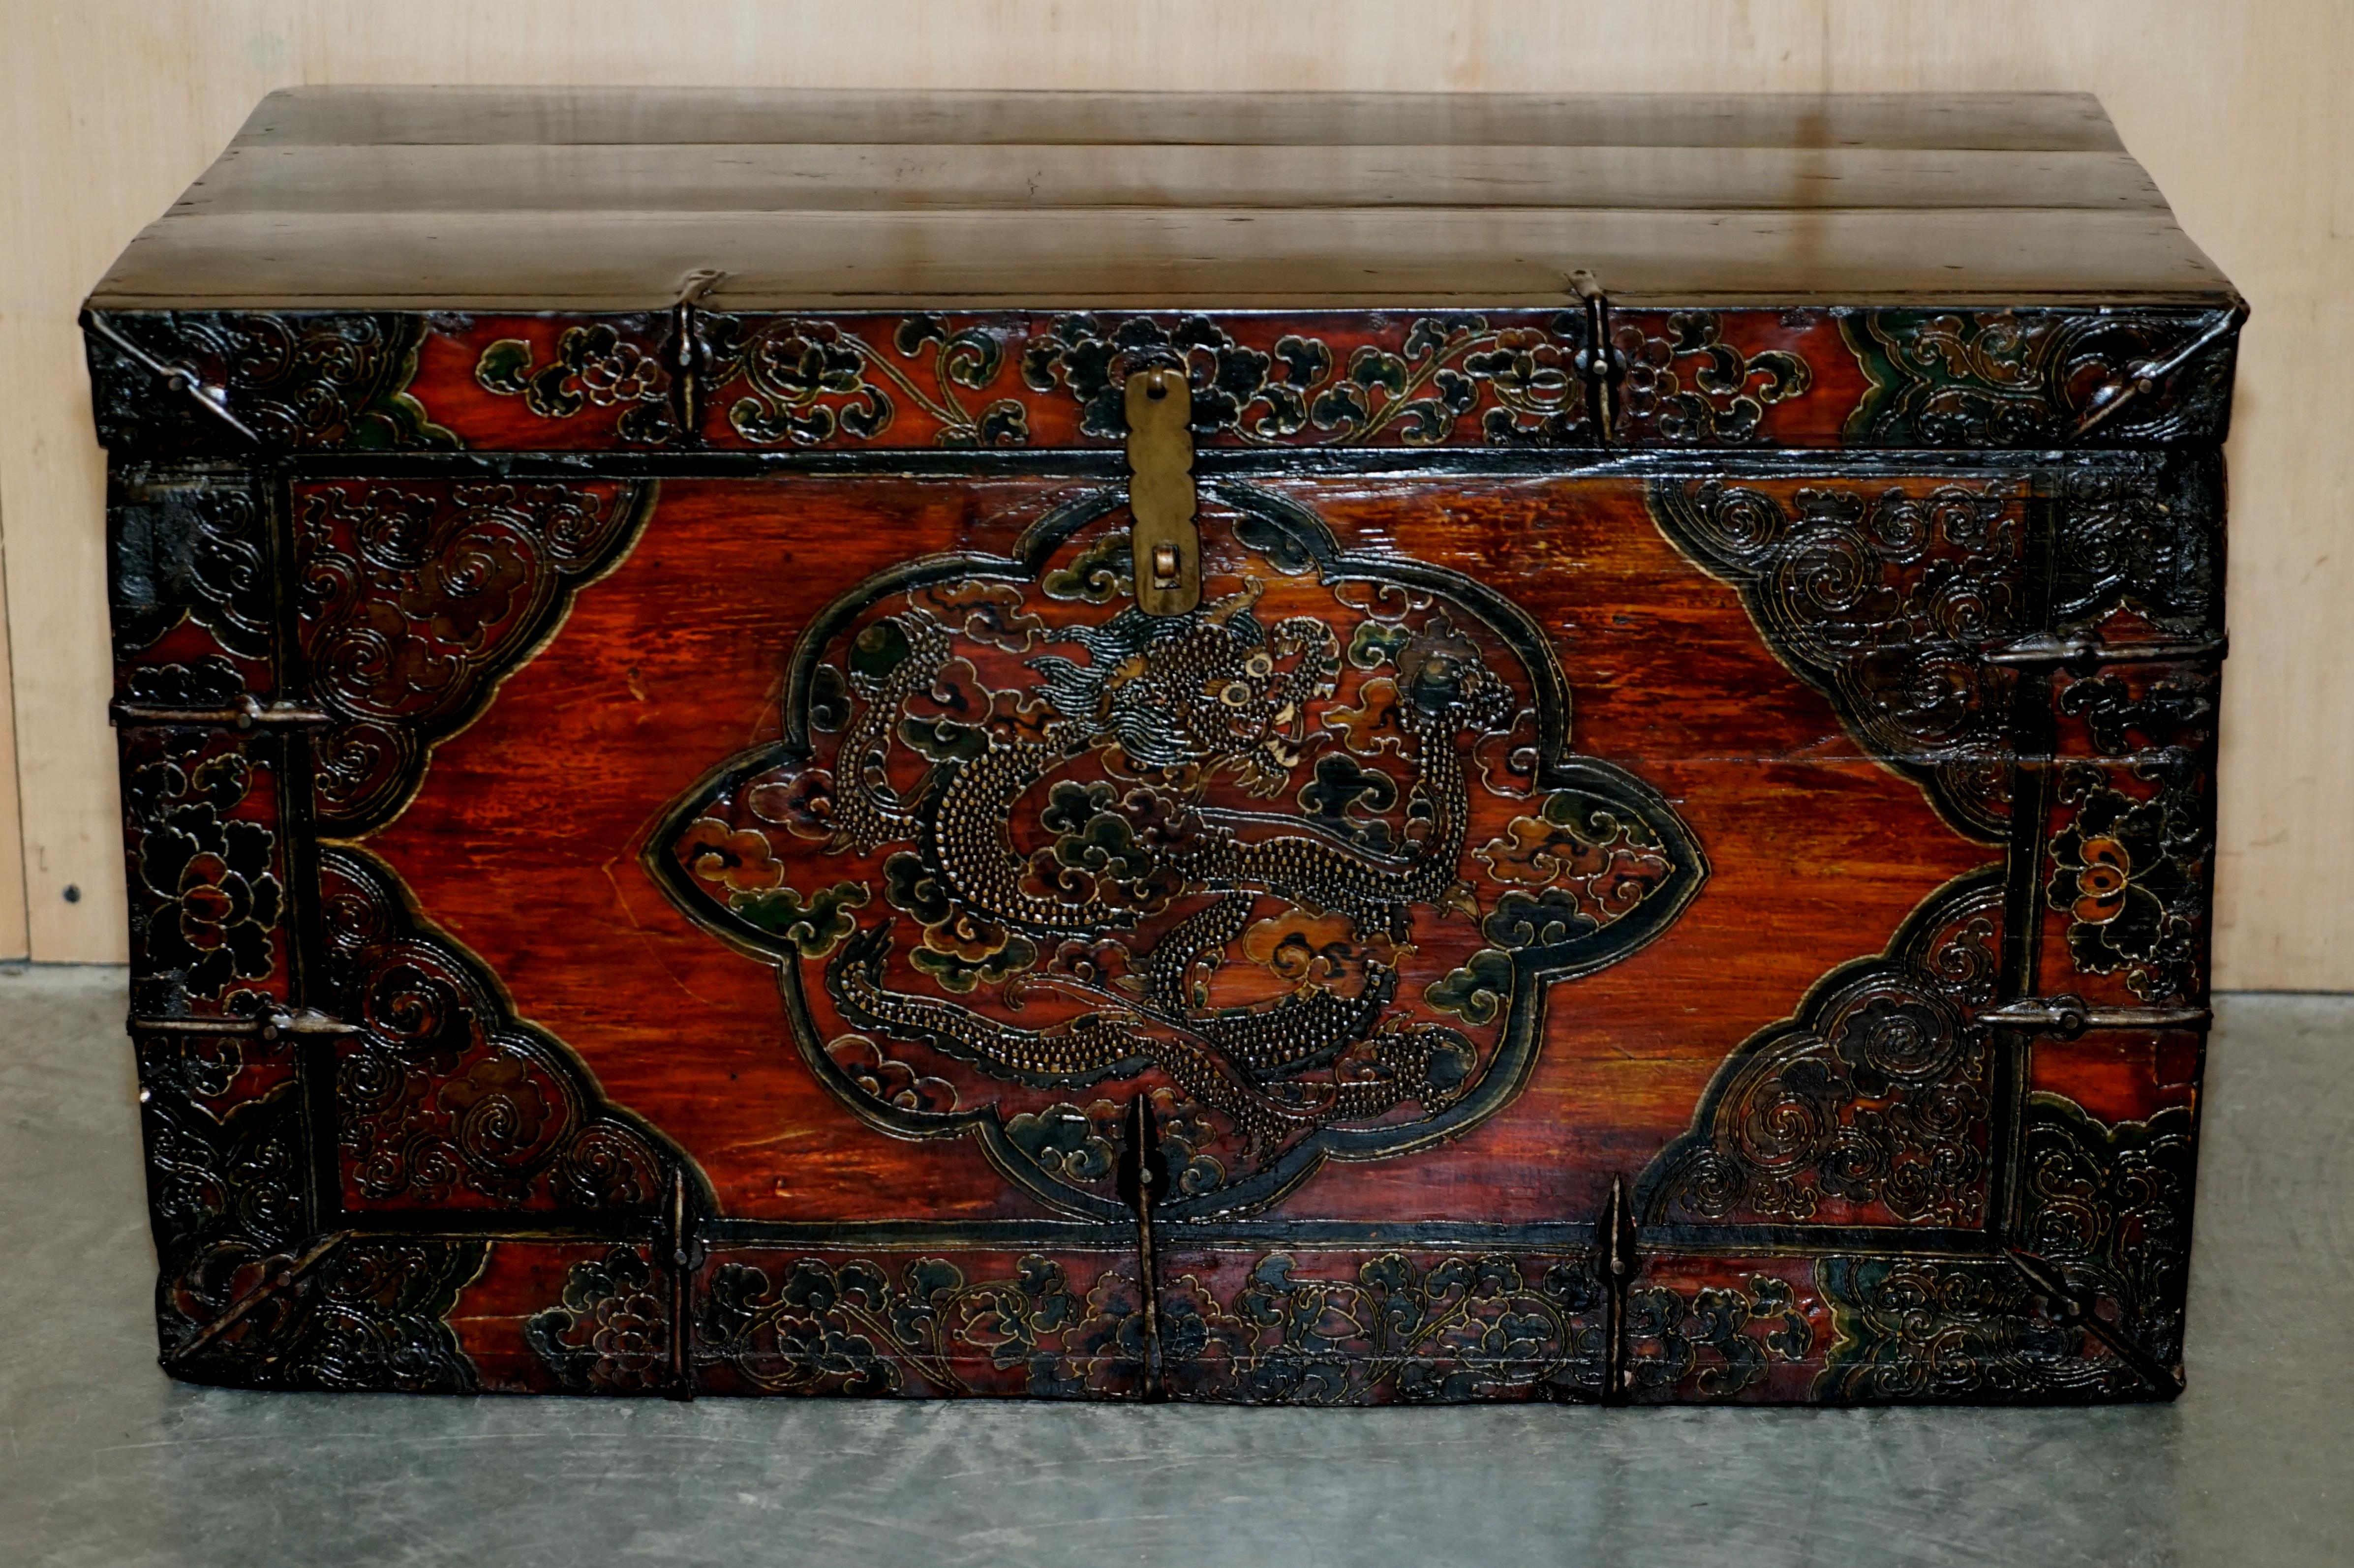 We are delighted to offer for sale this absolutely stunning, highly decorative, Antique Tibetan, Polychrome painted trunk depicting Dragons 

This is a very good looking and well made piece of art furniture. It is the best kind of antique because